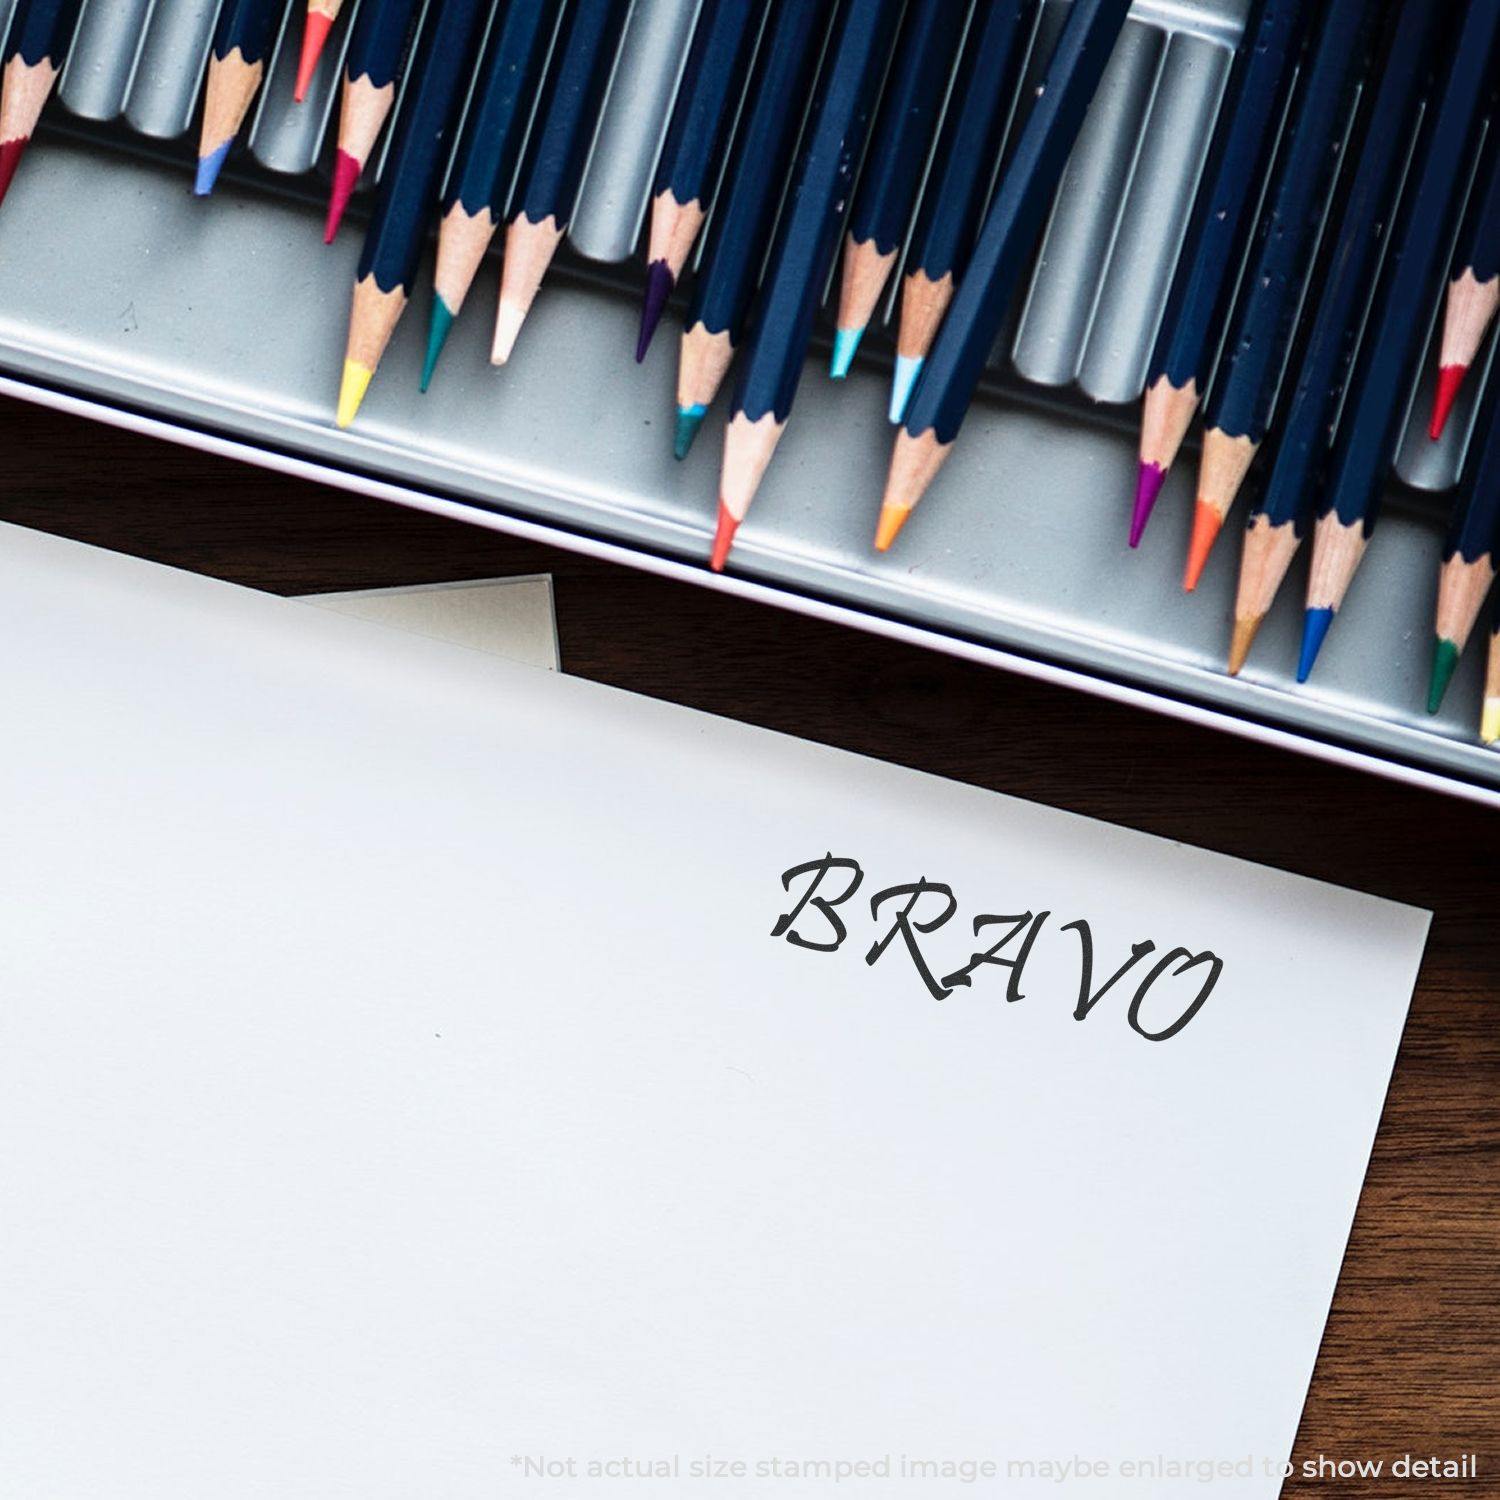 A stock office pre-inked stamp with a stamped image showing how the text "BRAVO" is displayed after stamping.